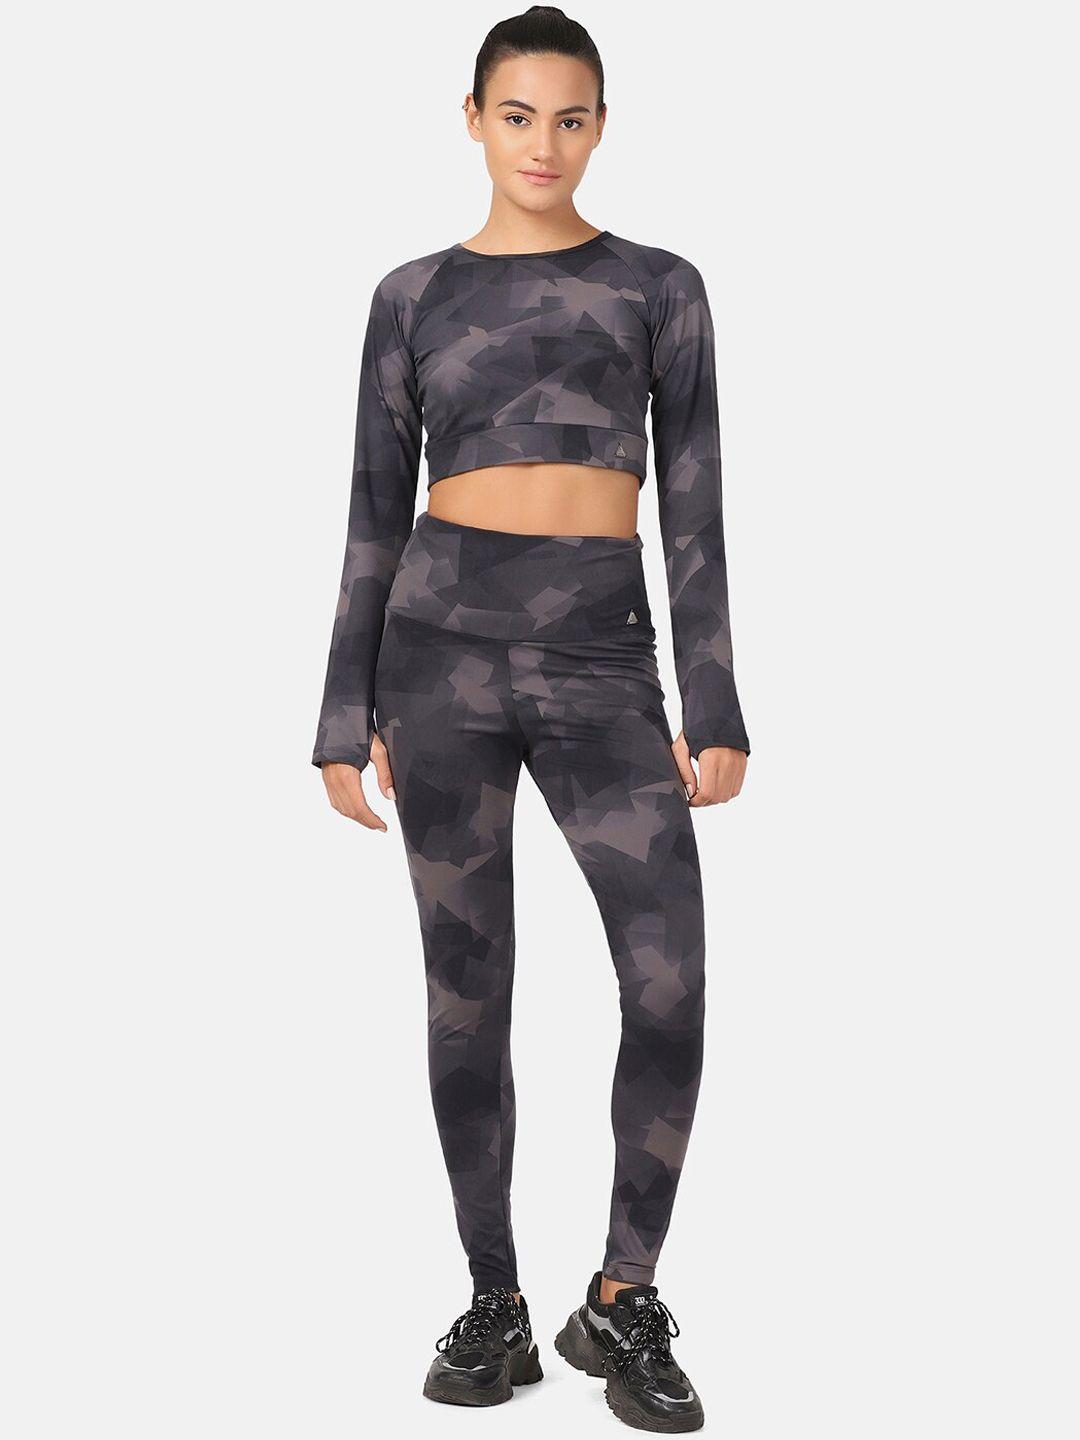 aesthetic bodies women grey printed gym co ords